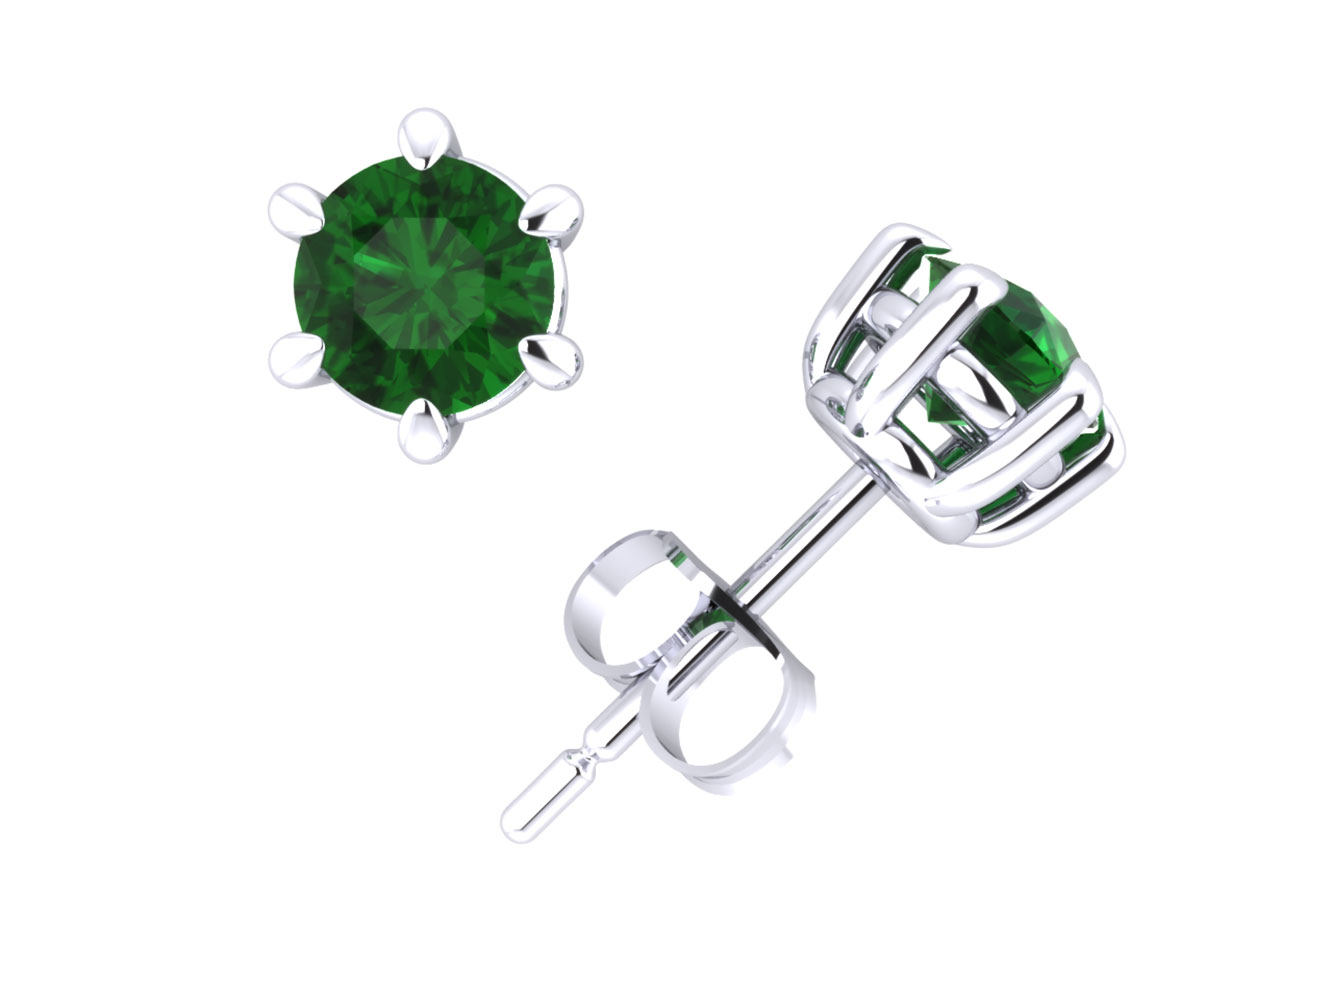 Jewel We Sell Genuine 3/4Ct Round Cut Emerald Basket Stud Earrings 14k White or Yellow Gold 6Prong AA Quality